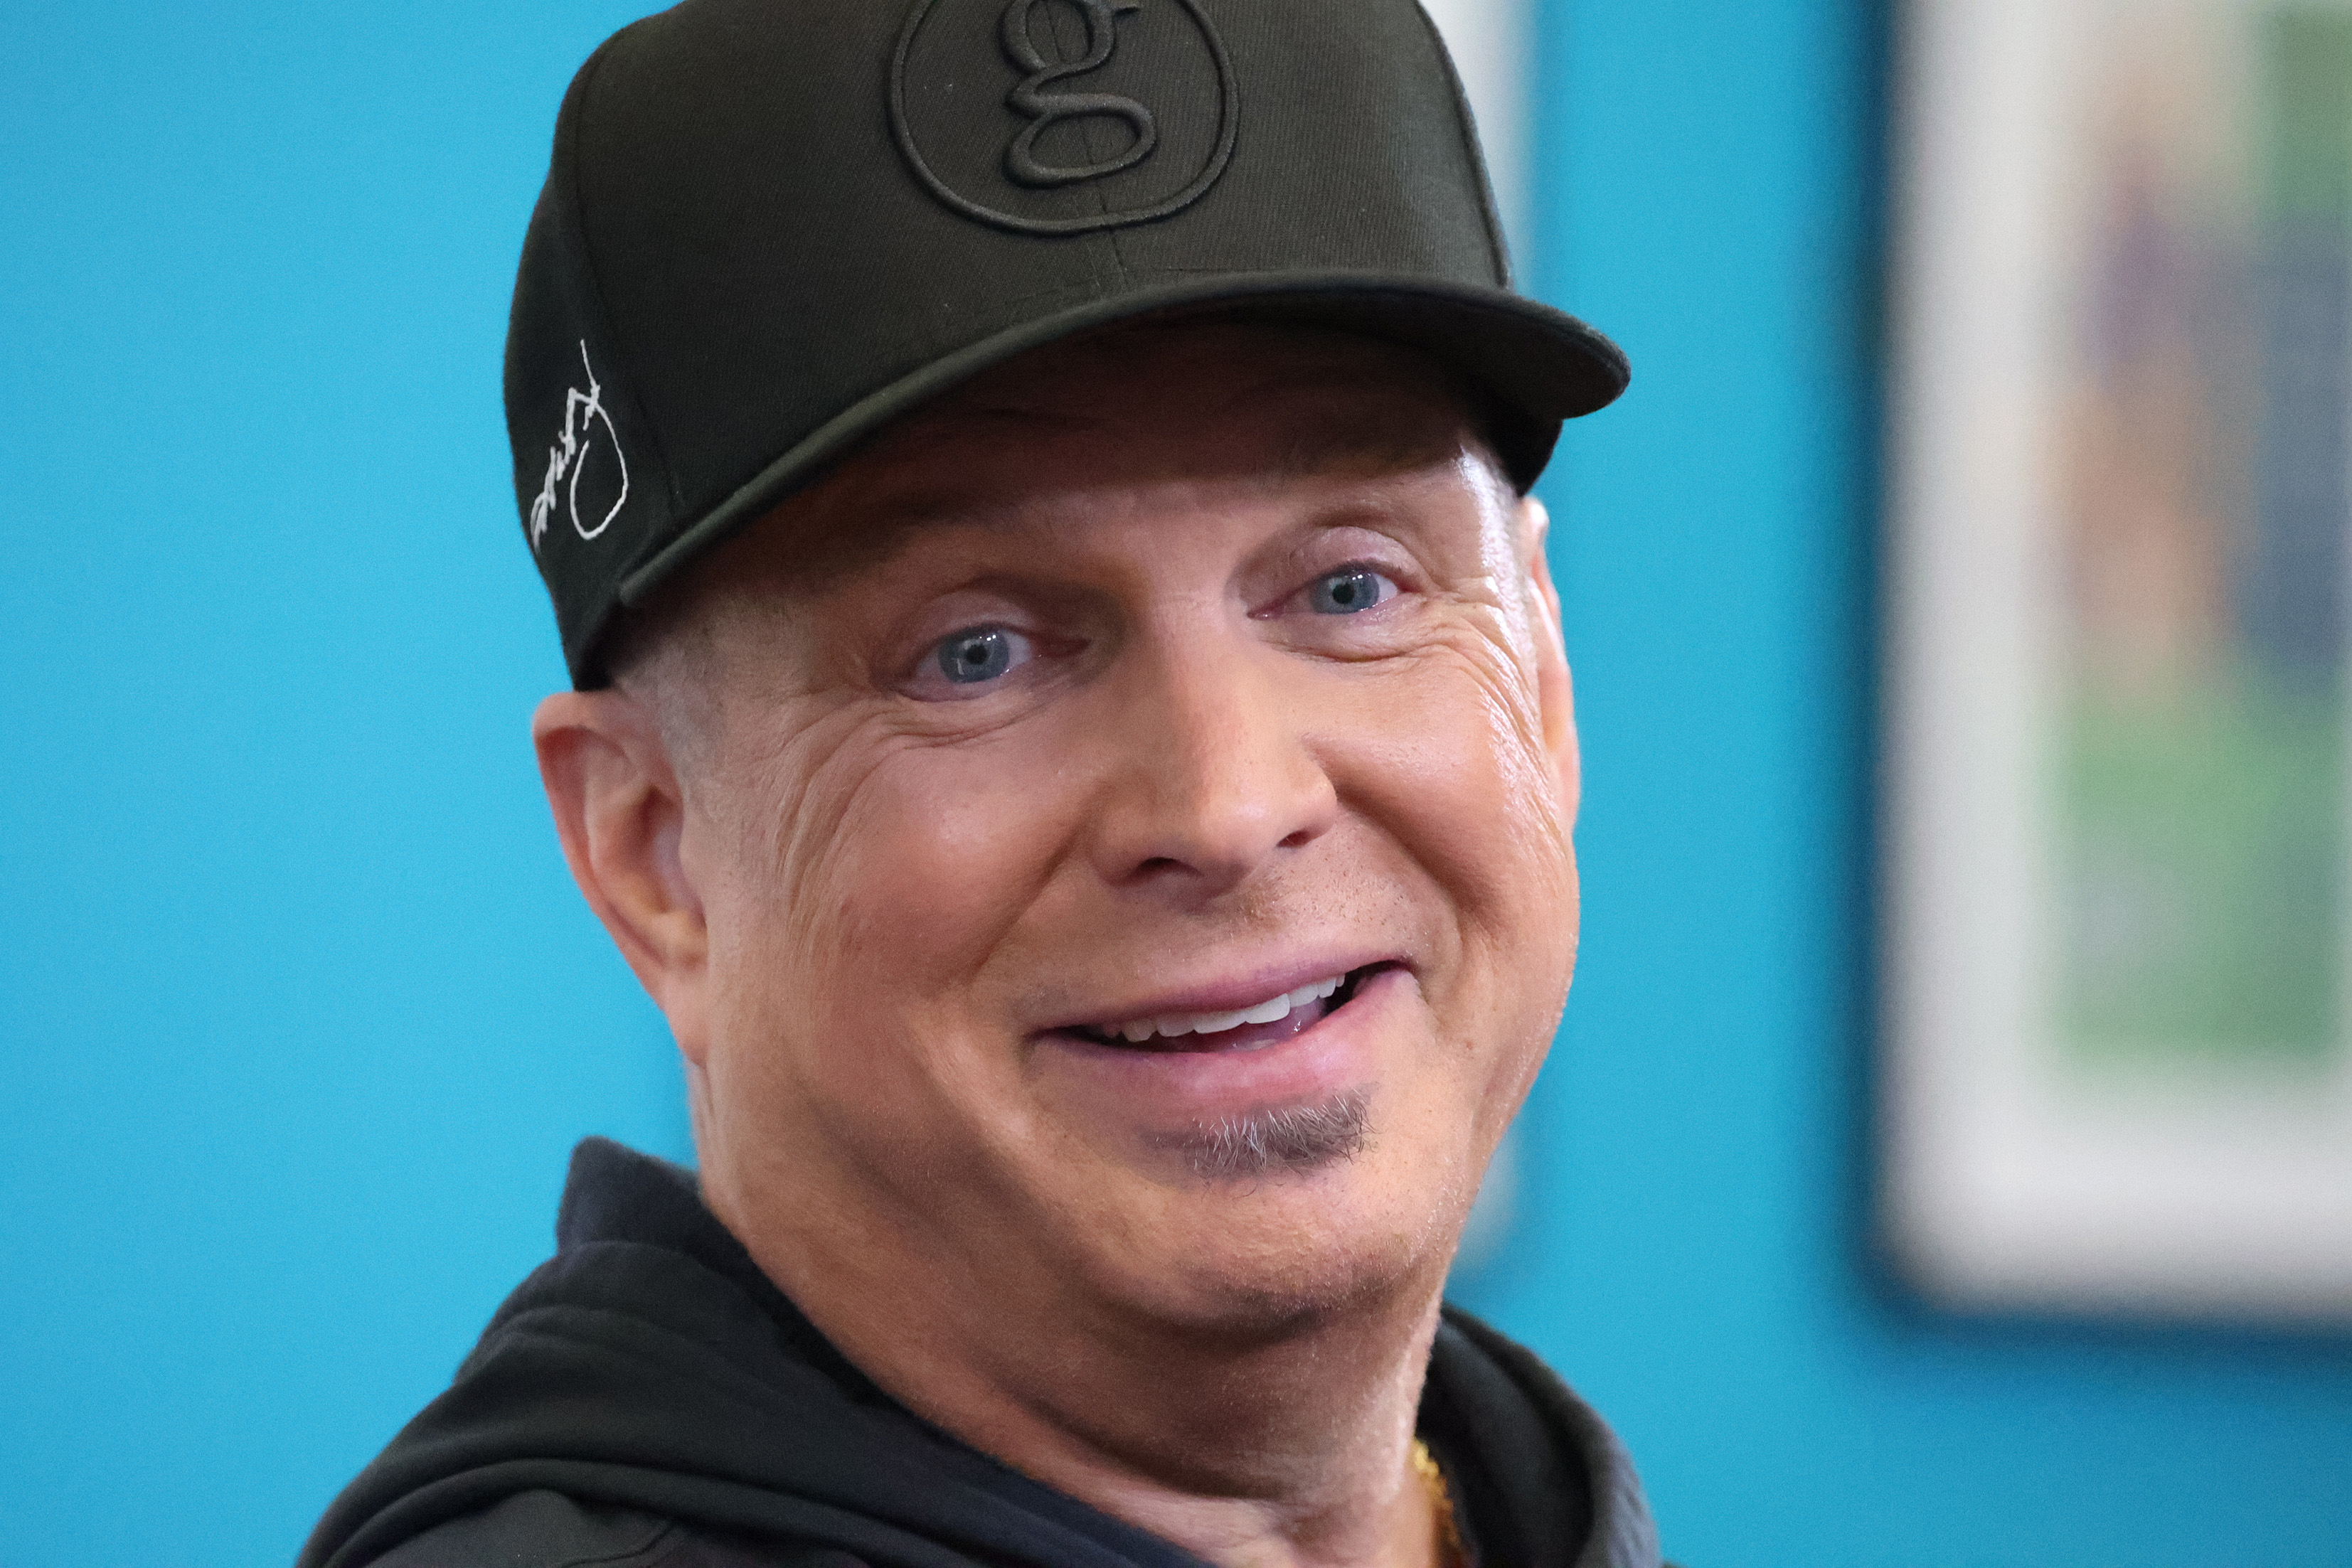 Garth Brooks during a press conference on September 8, 2022 in Dublin | Source: Getty Images